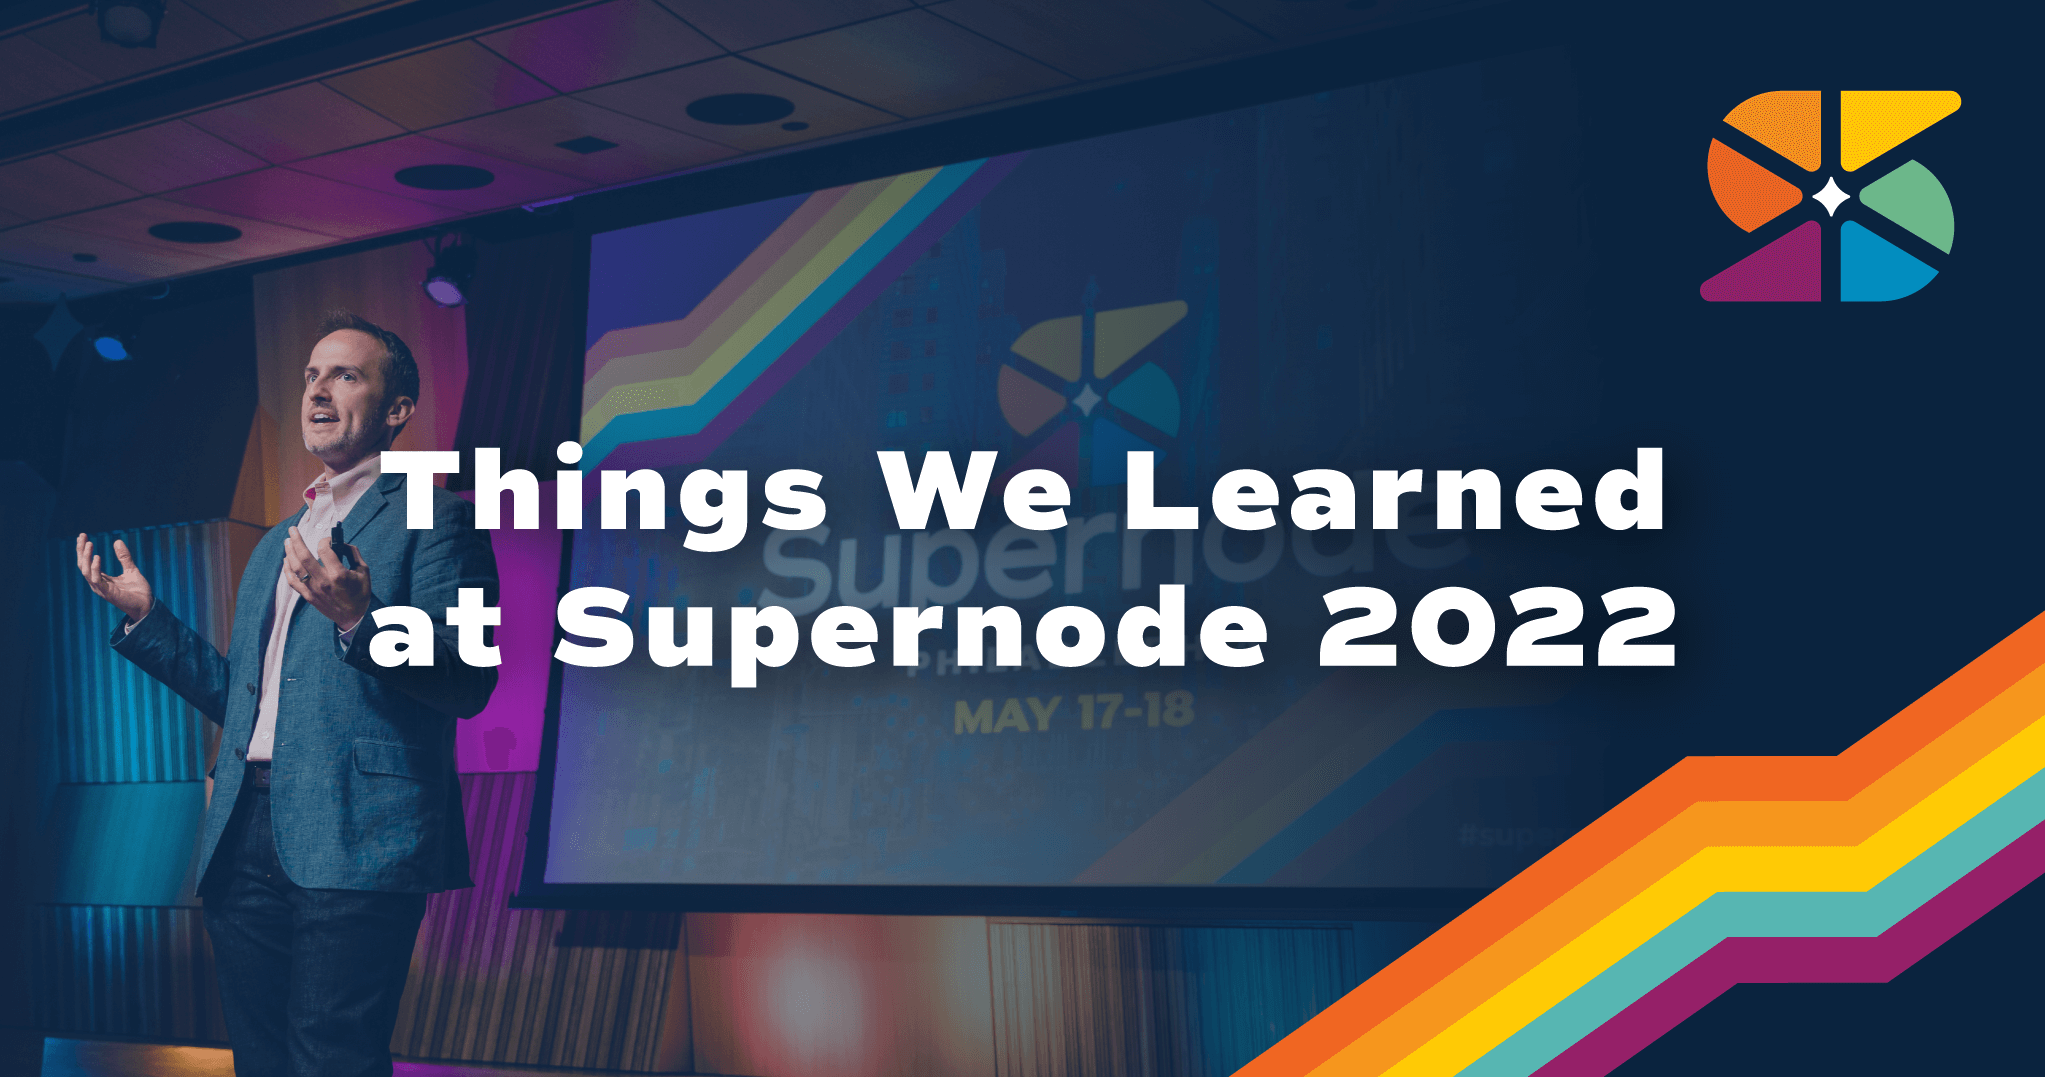 crossbeam-things-we-learned-supernode-2022-partner-ecosystems